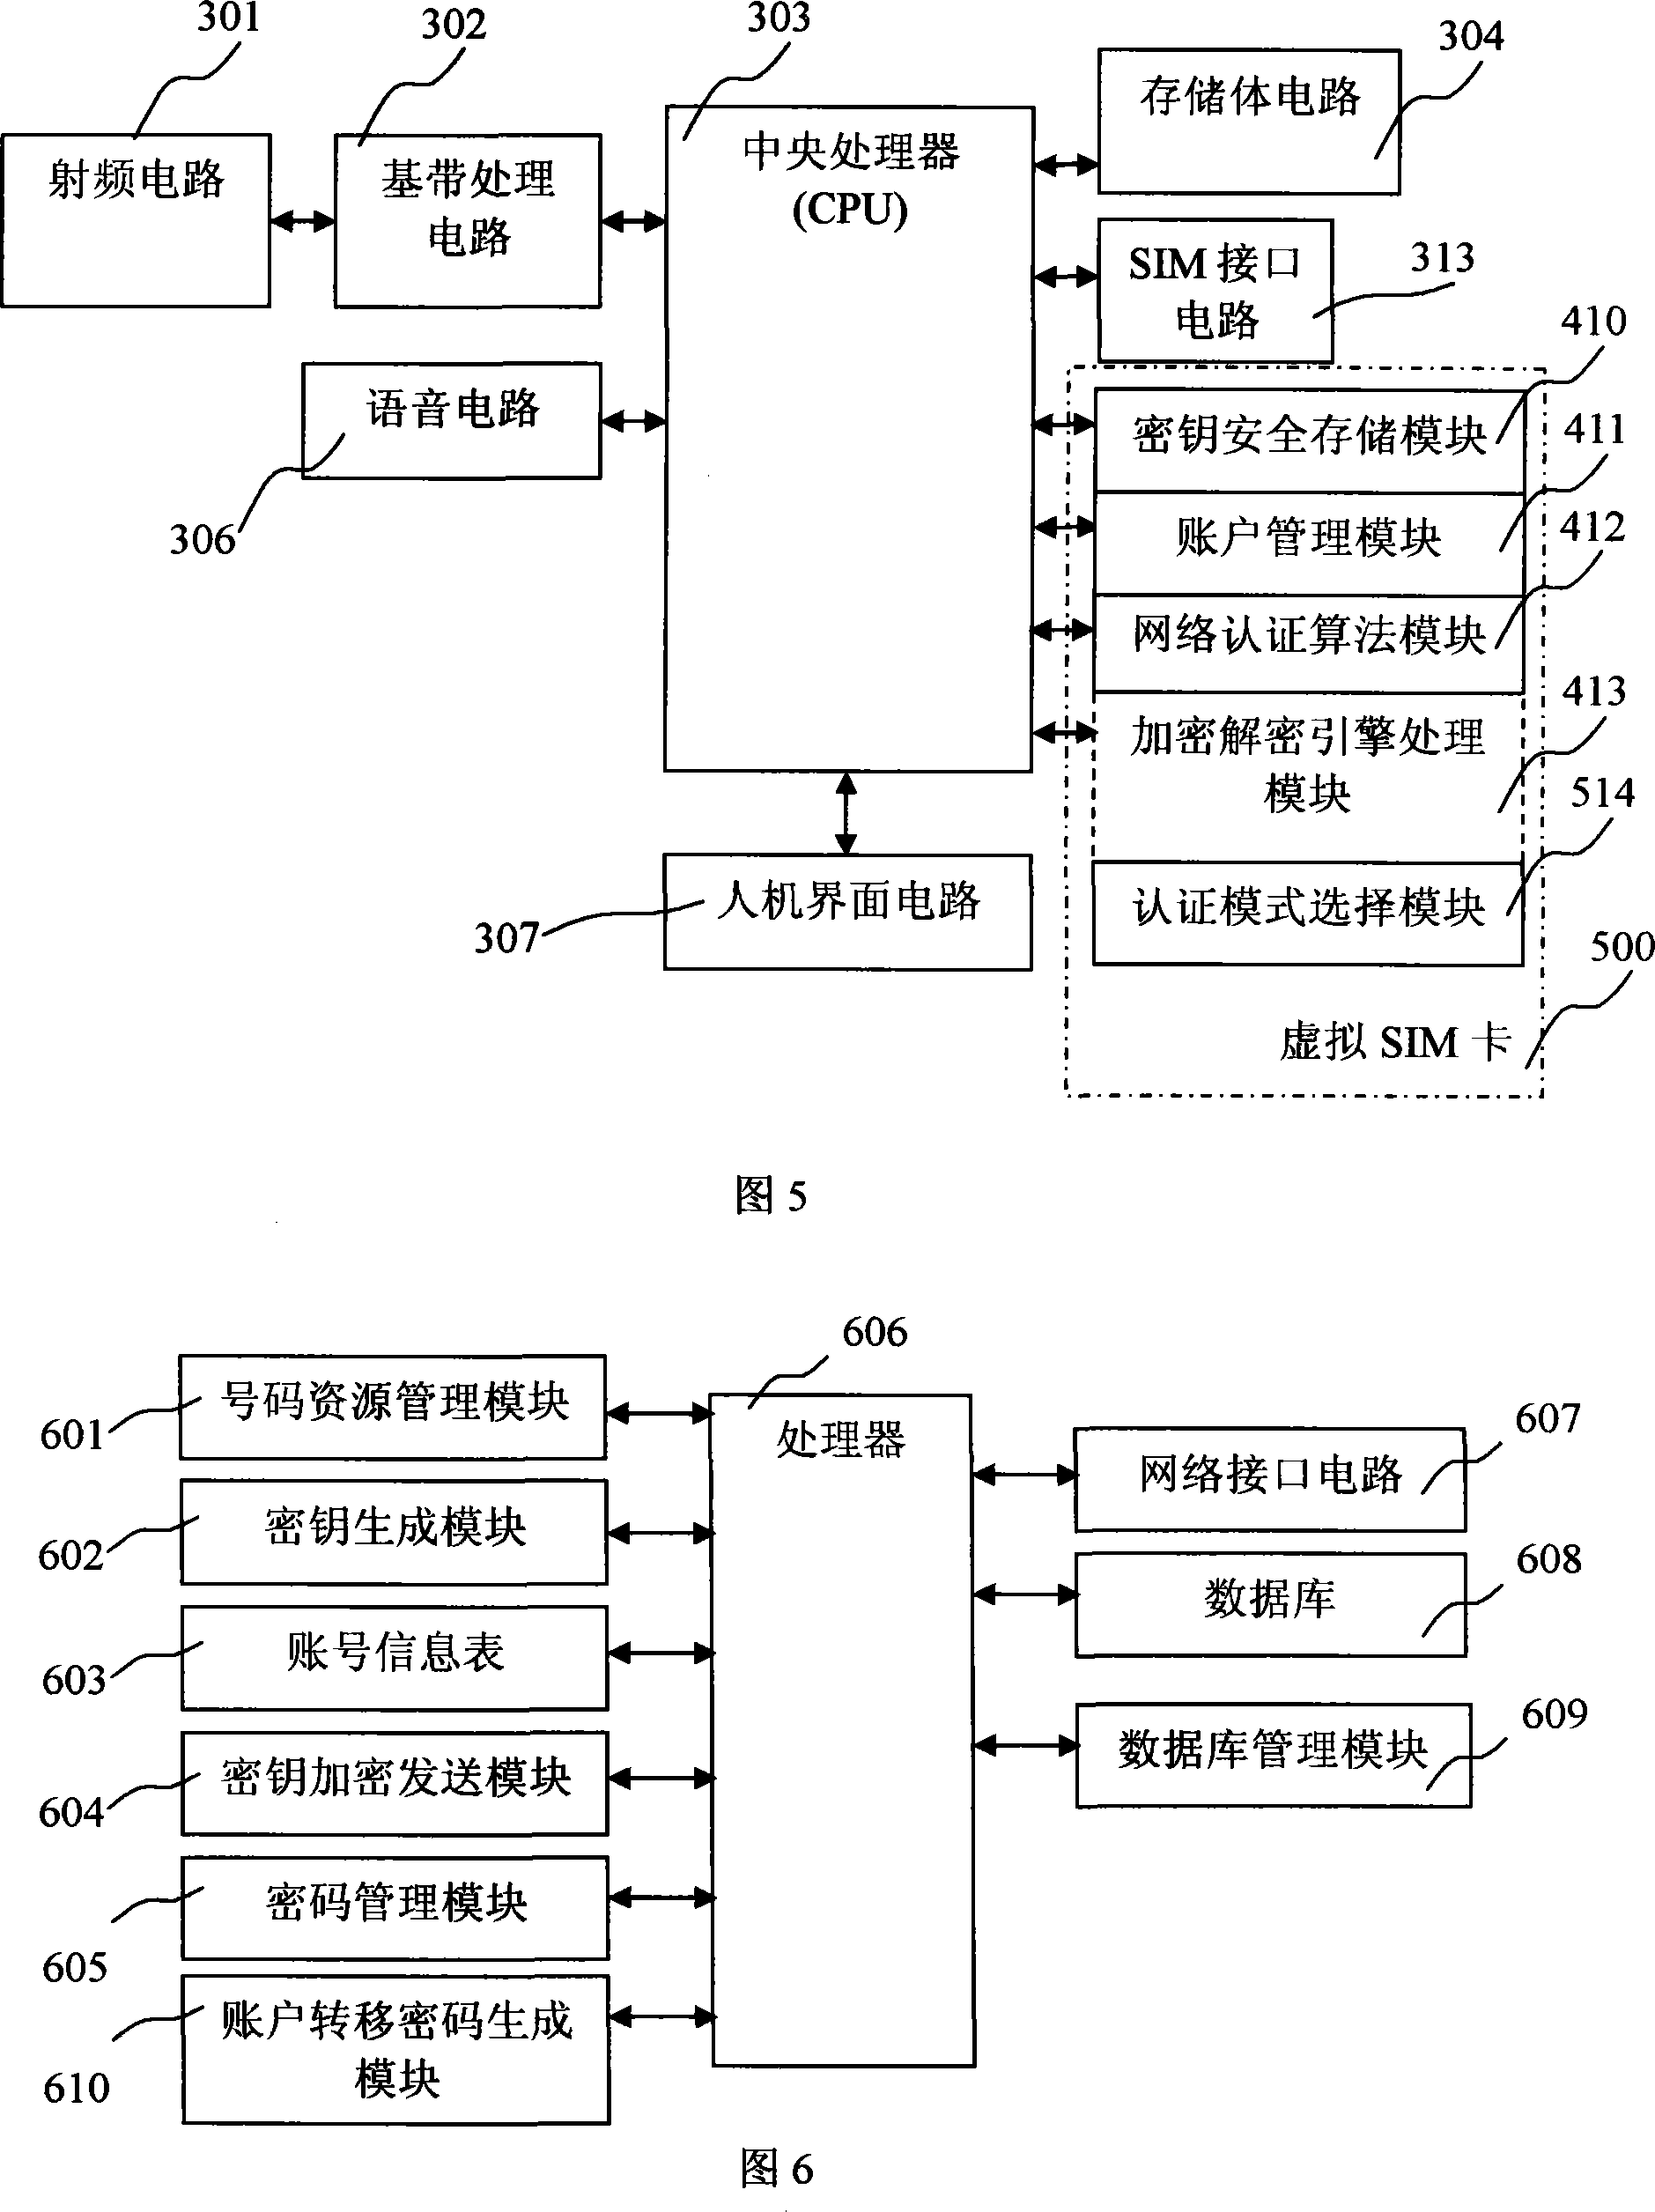 Mobile terminal supporting virtual SIM card and its user identity authentication method